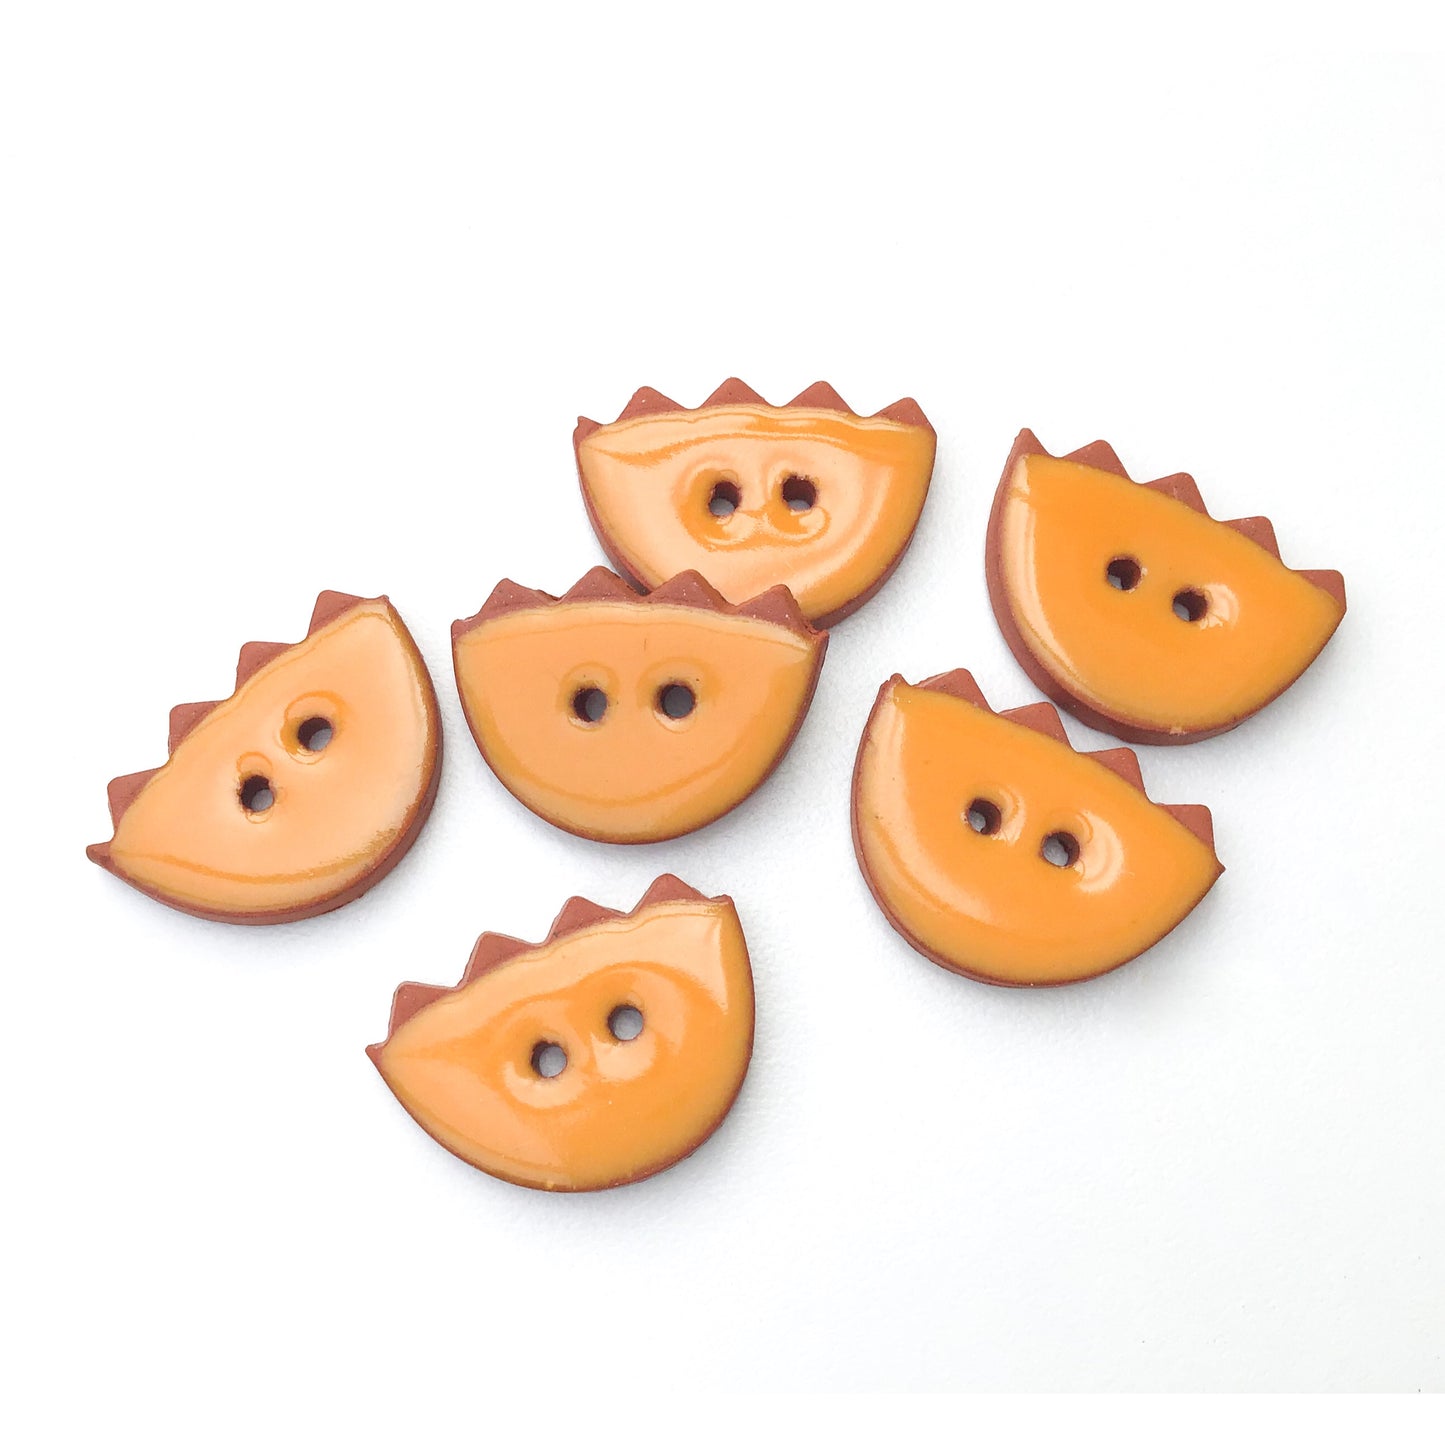 Cantaloupe Orange Ceramic Buttons - Ceramic Flower Buttons - 11/16" x 7/8" - 6 Pack